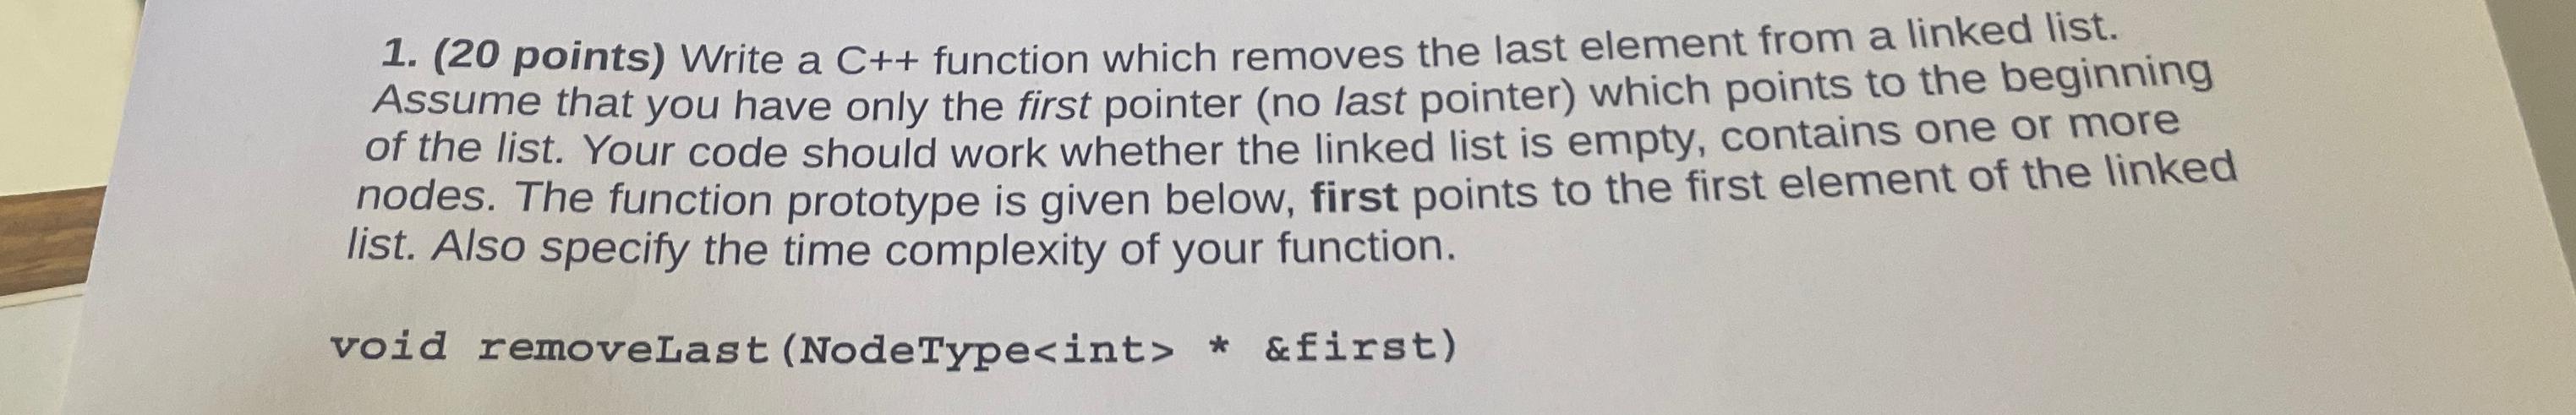 1. (20 points) Write a C++ function which removes the last element from a linked list. Assume that you have